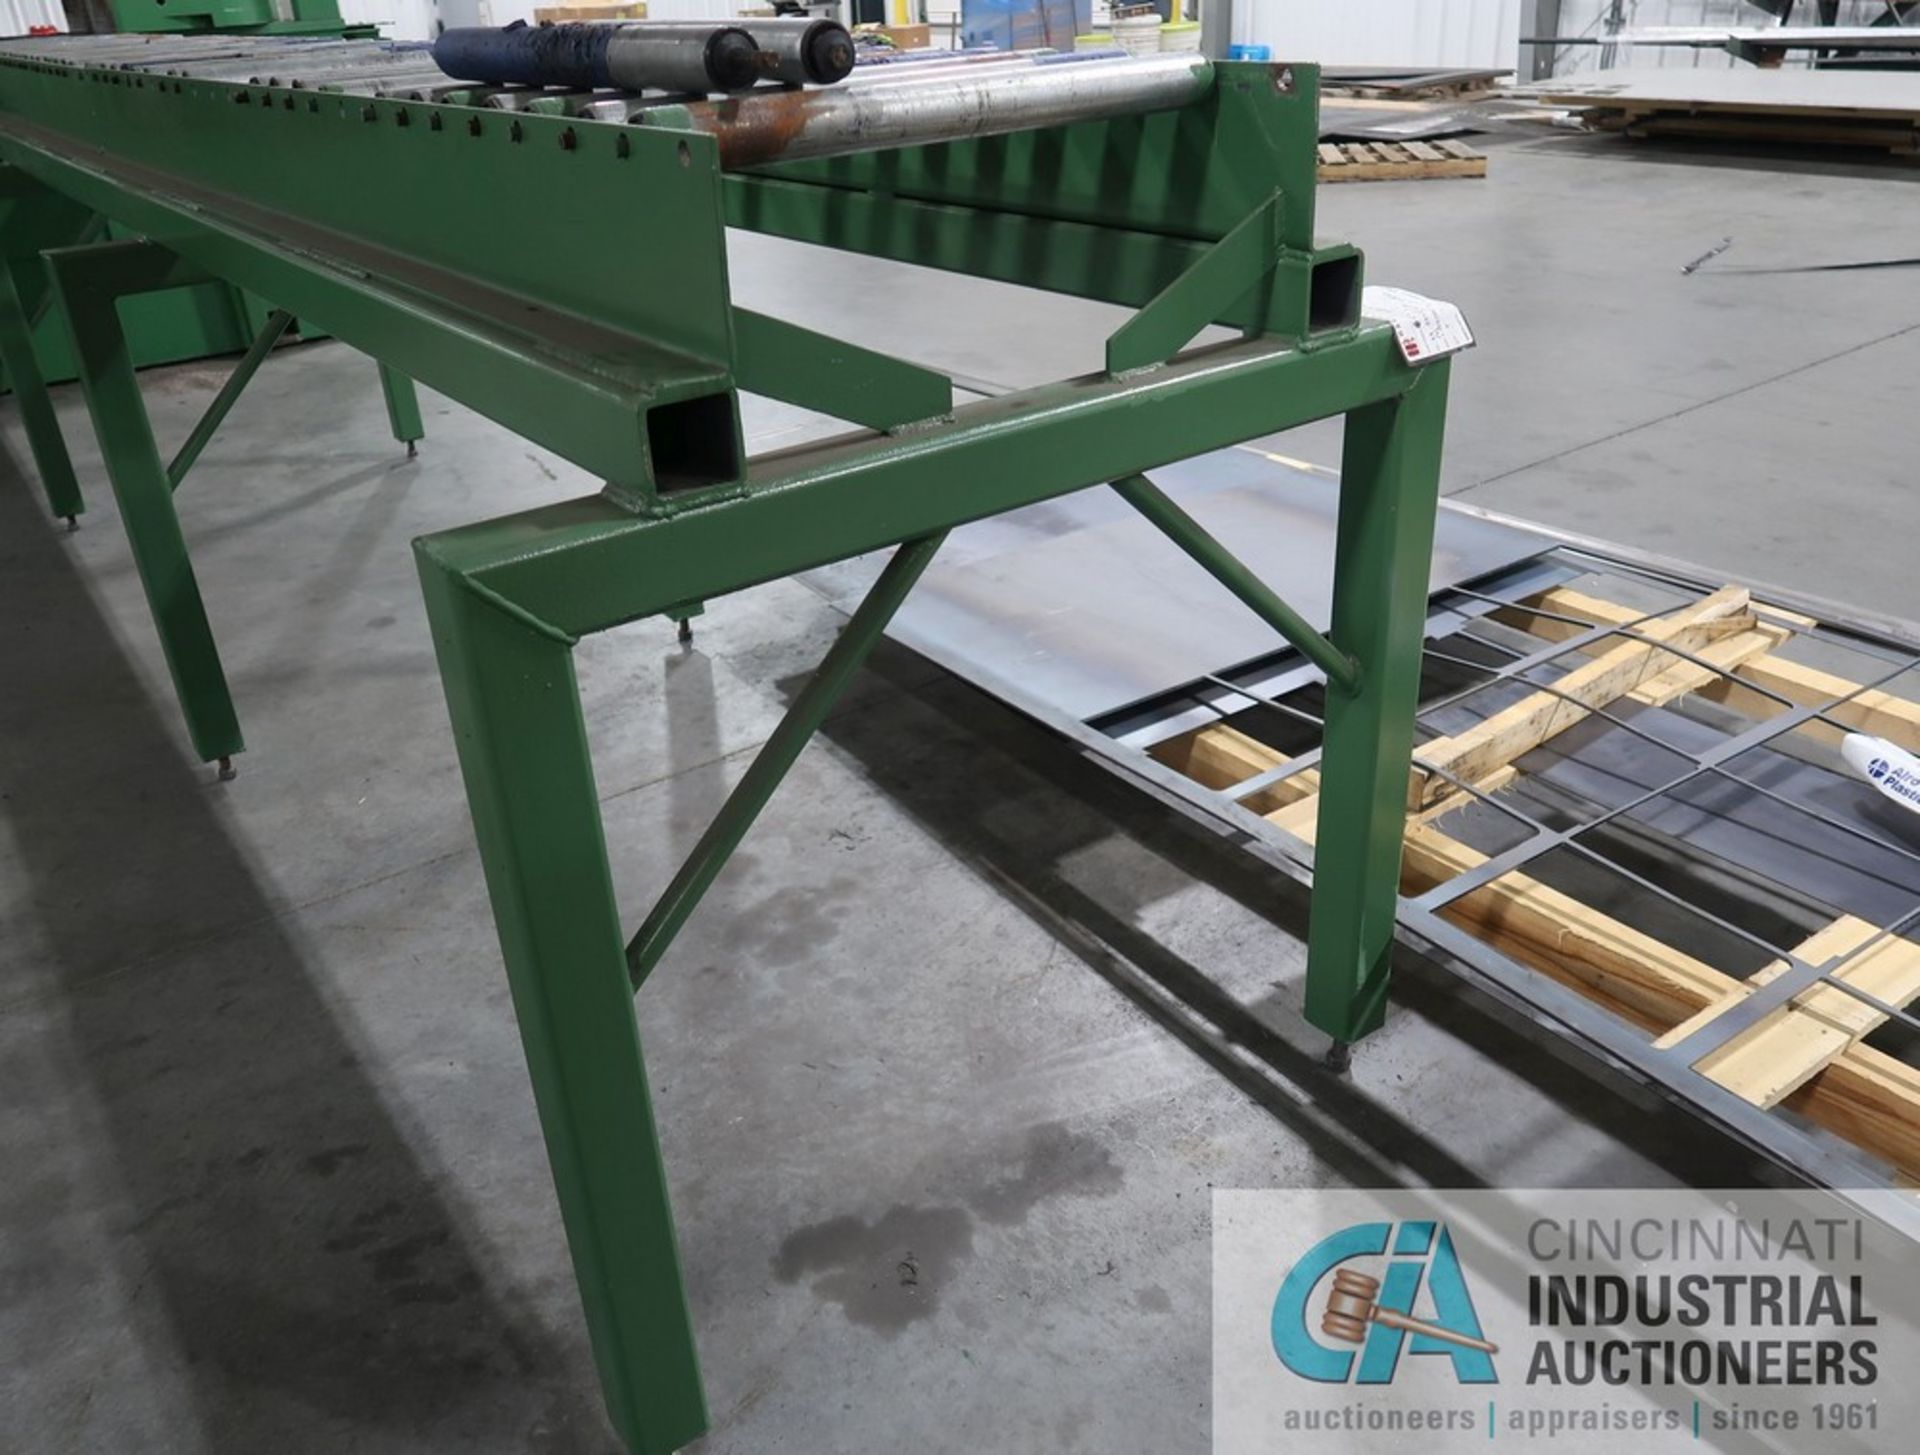 SECTION 20' X 18" X 47" HIGH SHOP BUILT HEAVY DUTY GRAVITY FEED ROLLER CONVEYOR - Image 3 of 3